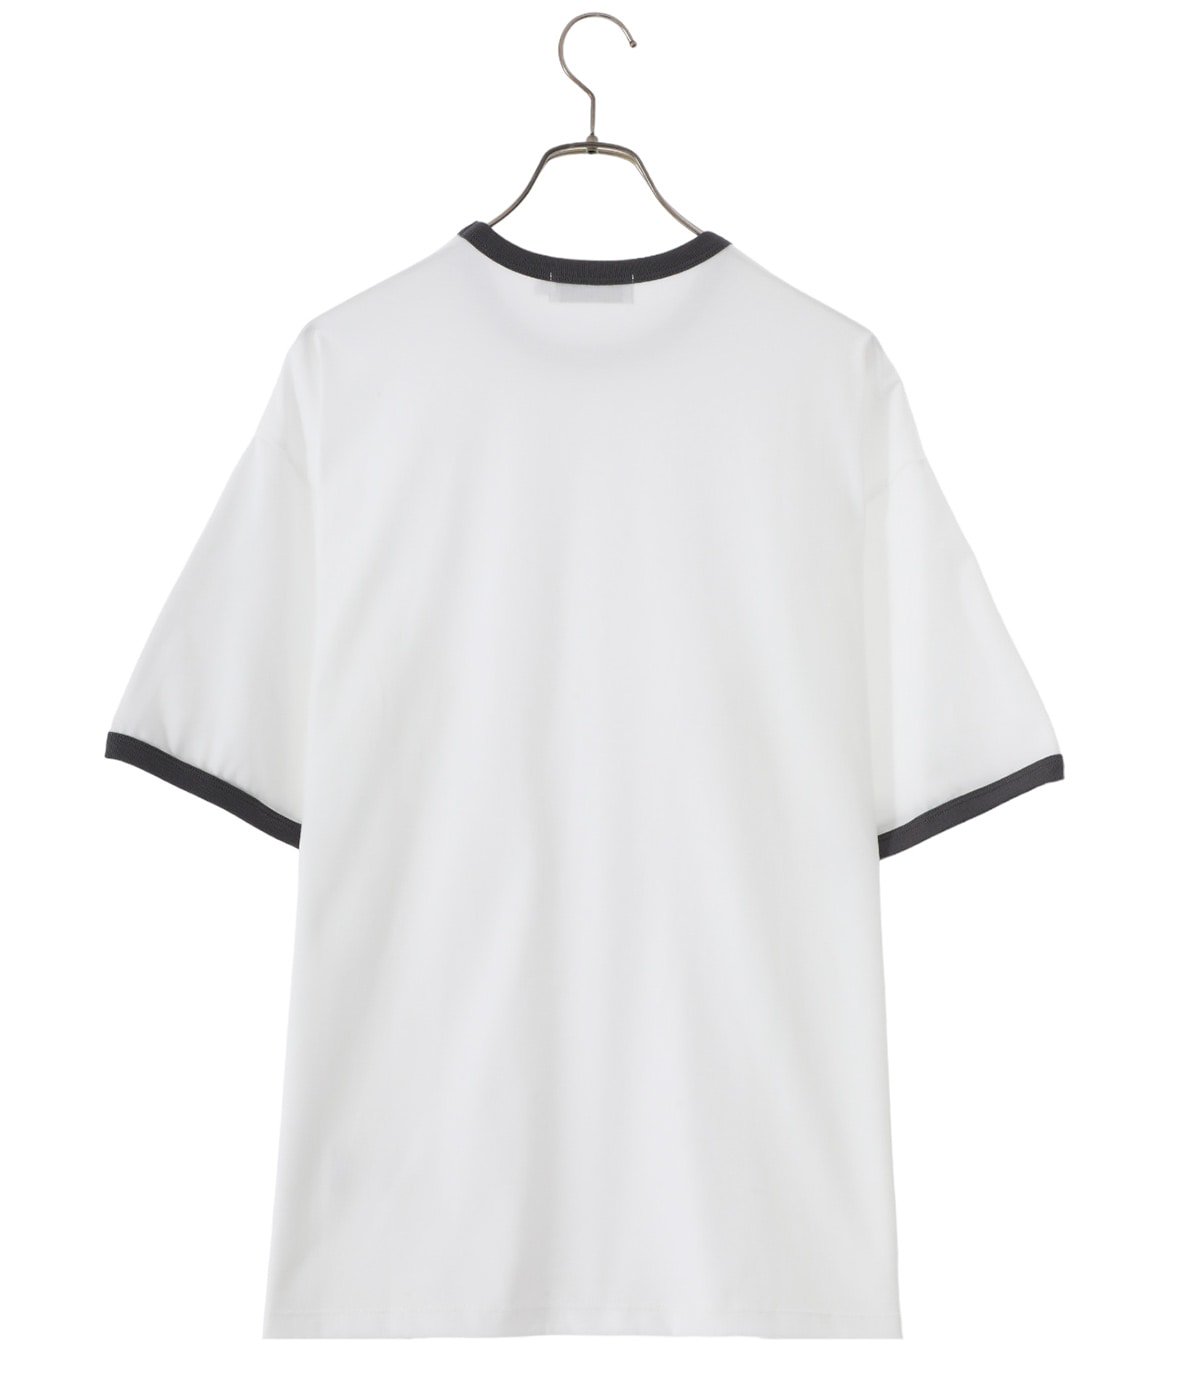 Fine Cotton Ringer S/S Tee | Graphpaper(グラフペーパー) / トップス